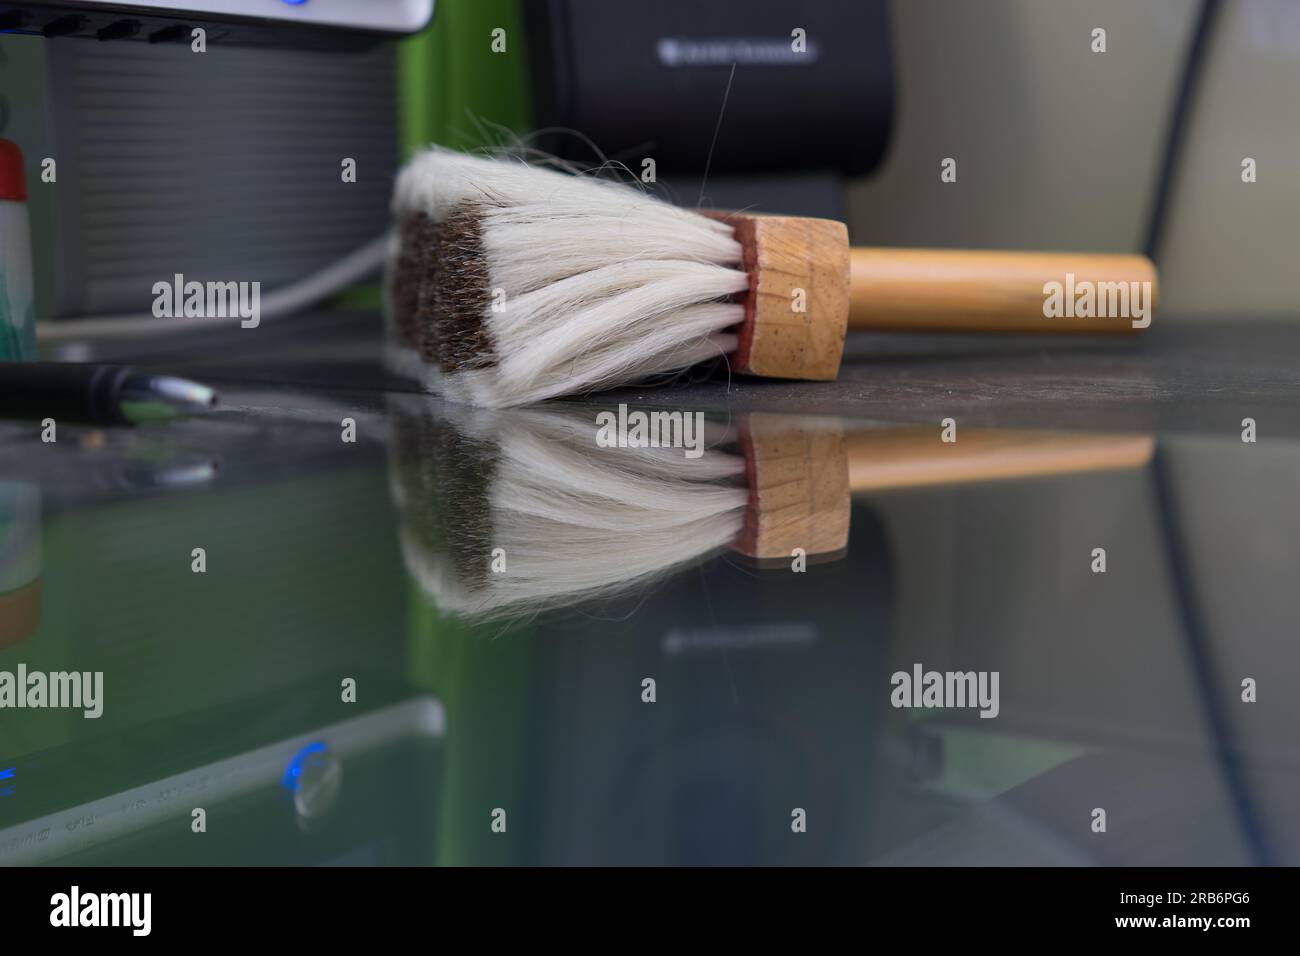 https://c8.alamy.com/comp/2RB6PG6/white-dusting-brush-with-dark-inner-bristles-and-its-reflection-on-a-glass-topped-computer-table-2RB6PG6.jpg